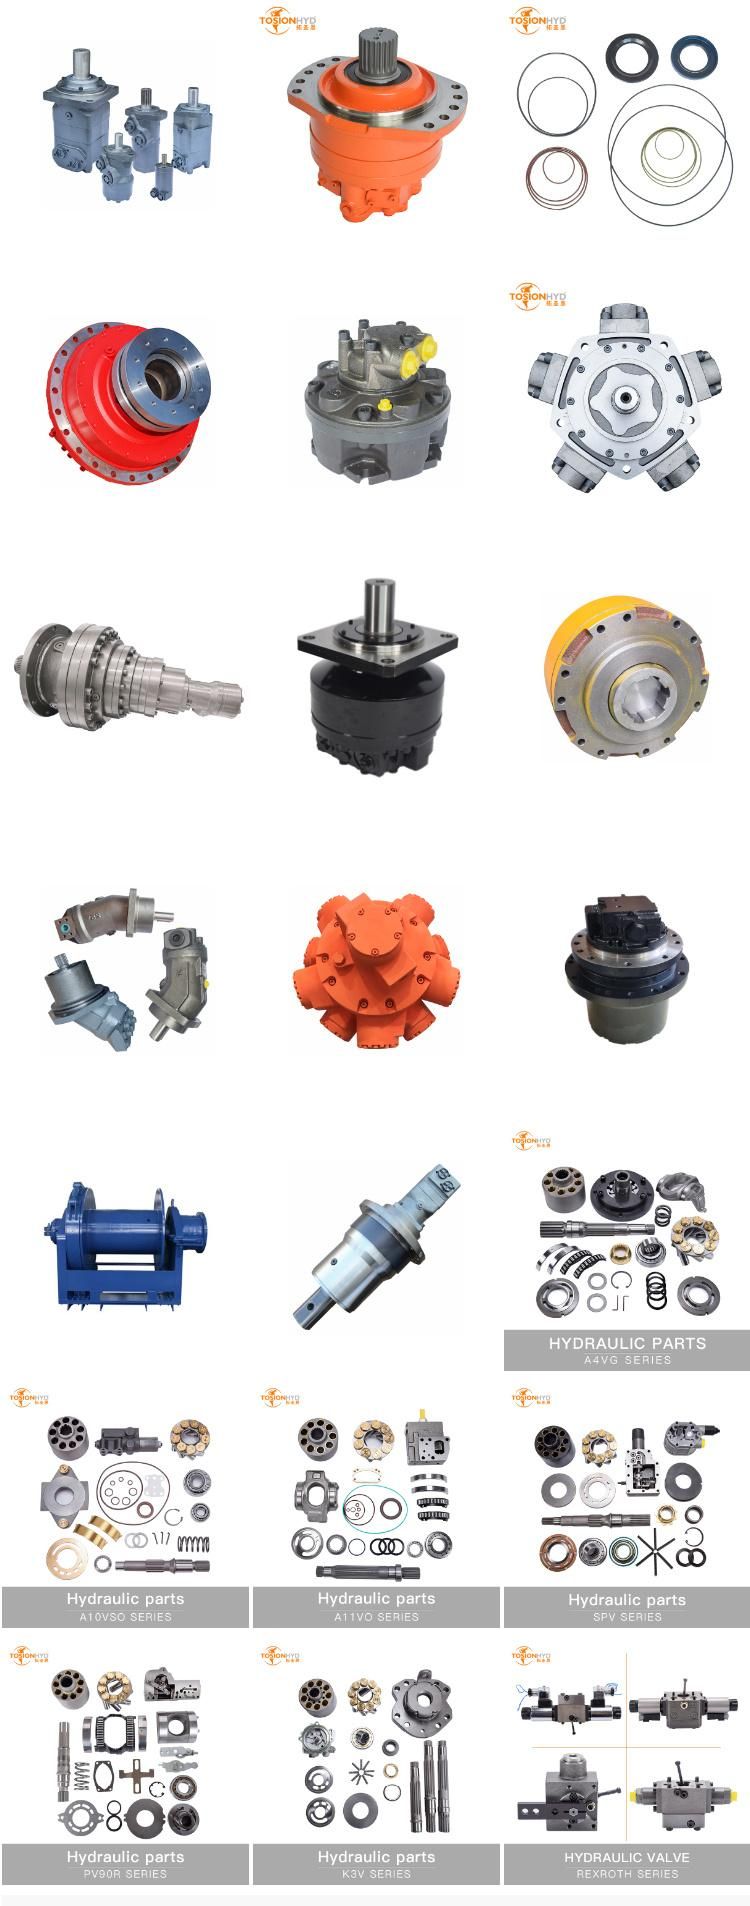 A6ve 55 Hydraulic Motor Parts with Rexroth Spare Repair Kits